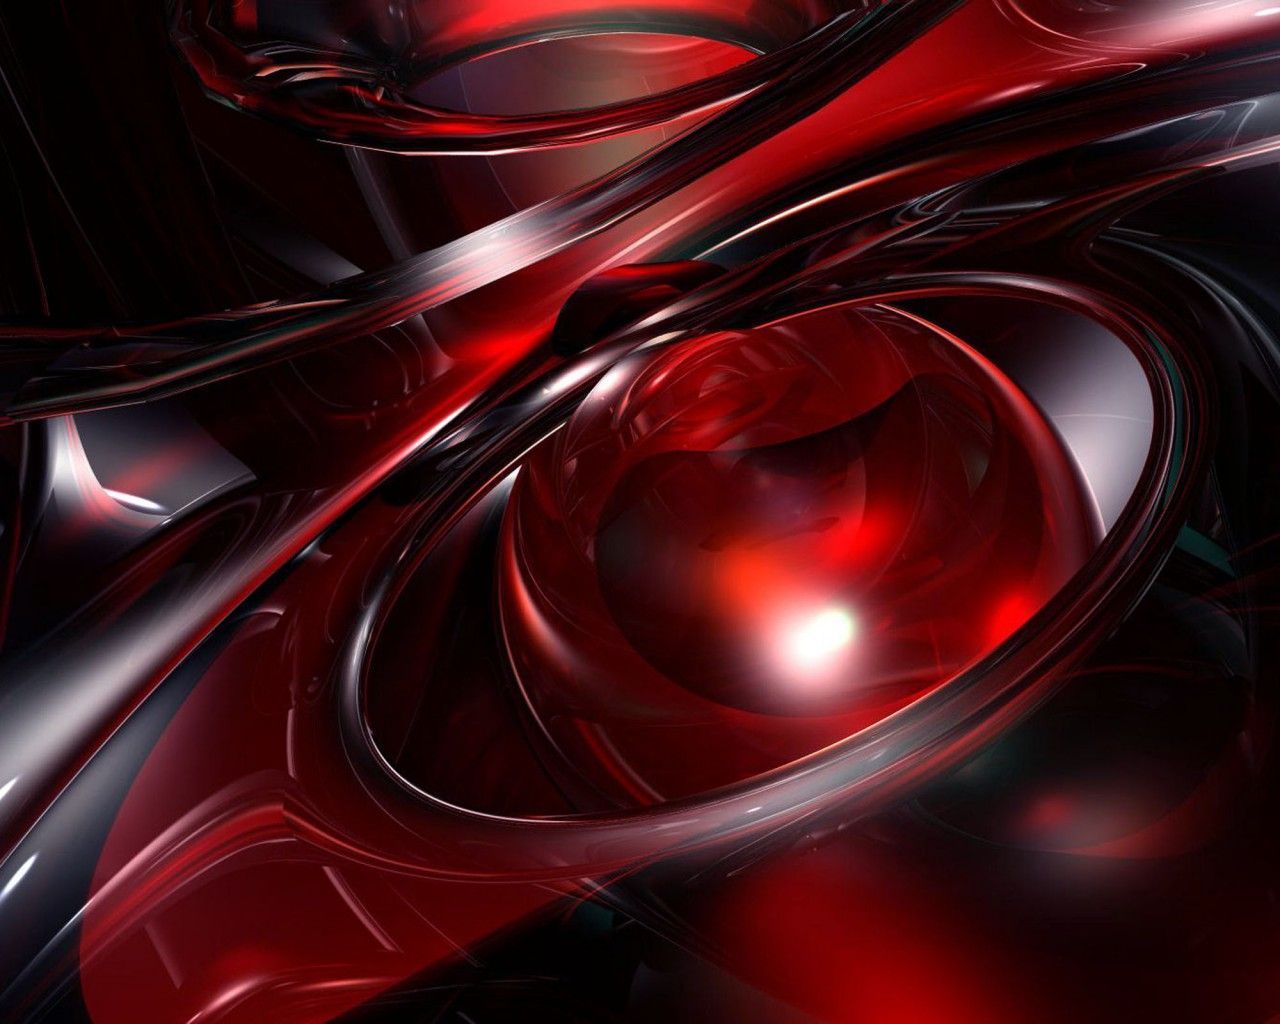 Red sphere & Curves wallpaper | Wallpapers Design